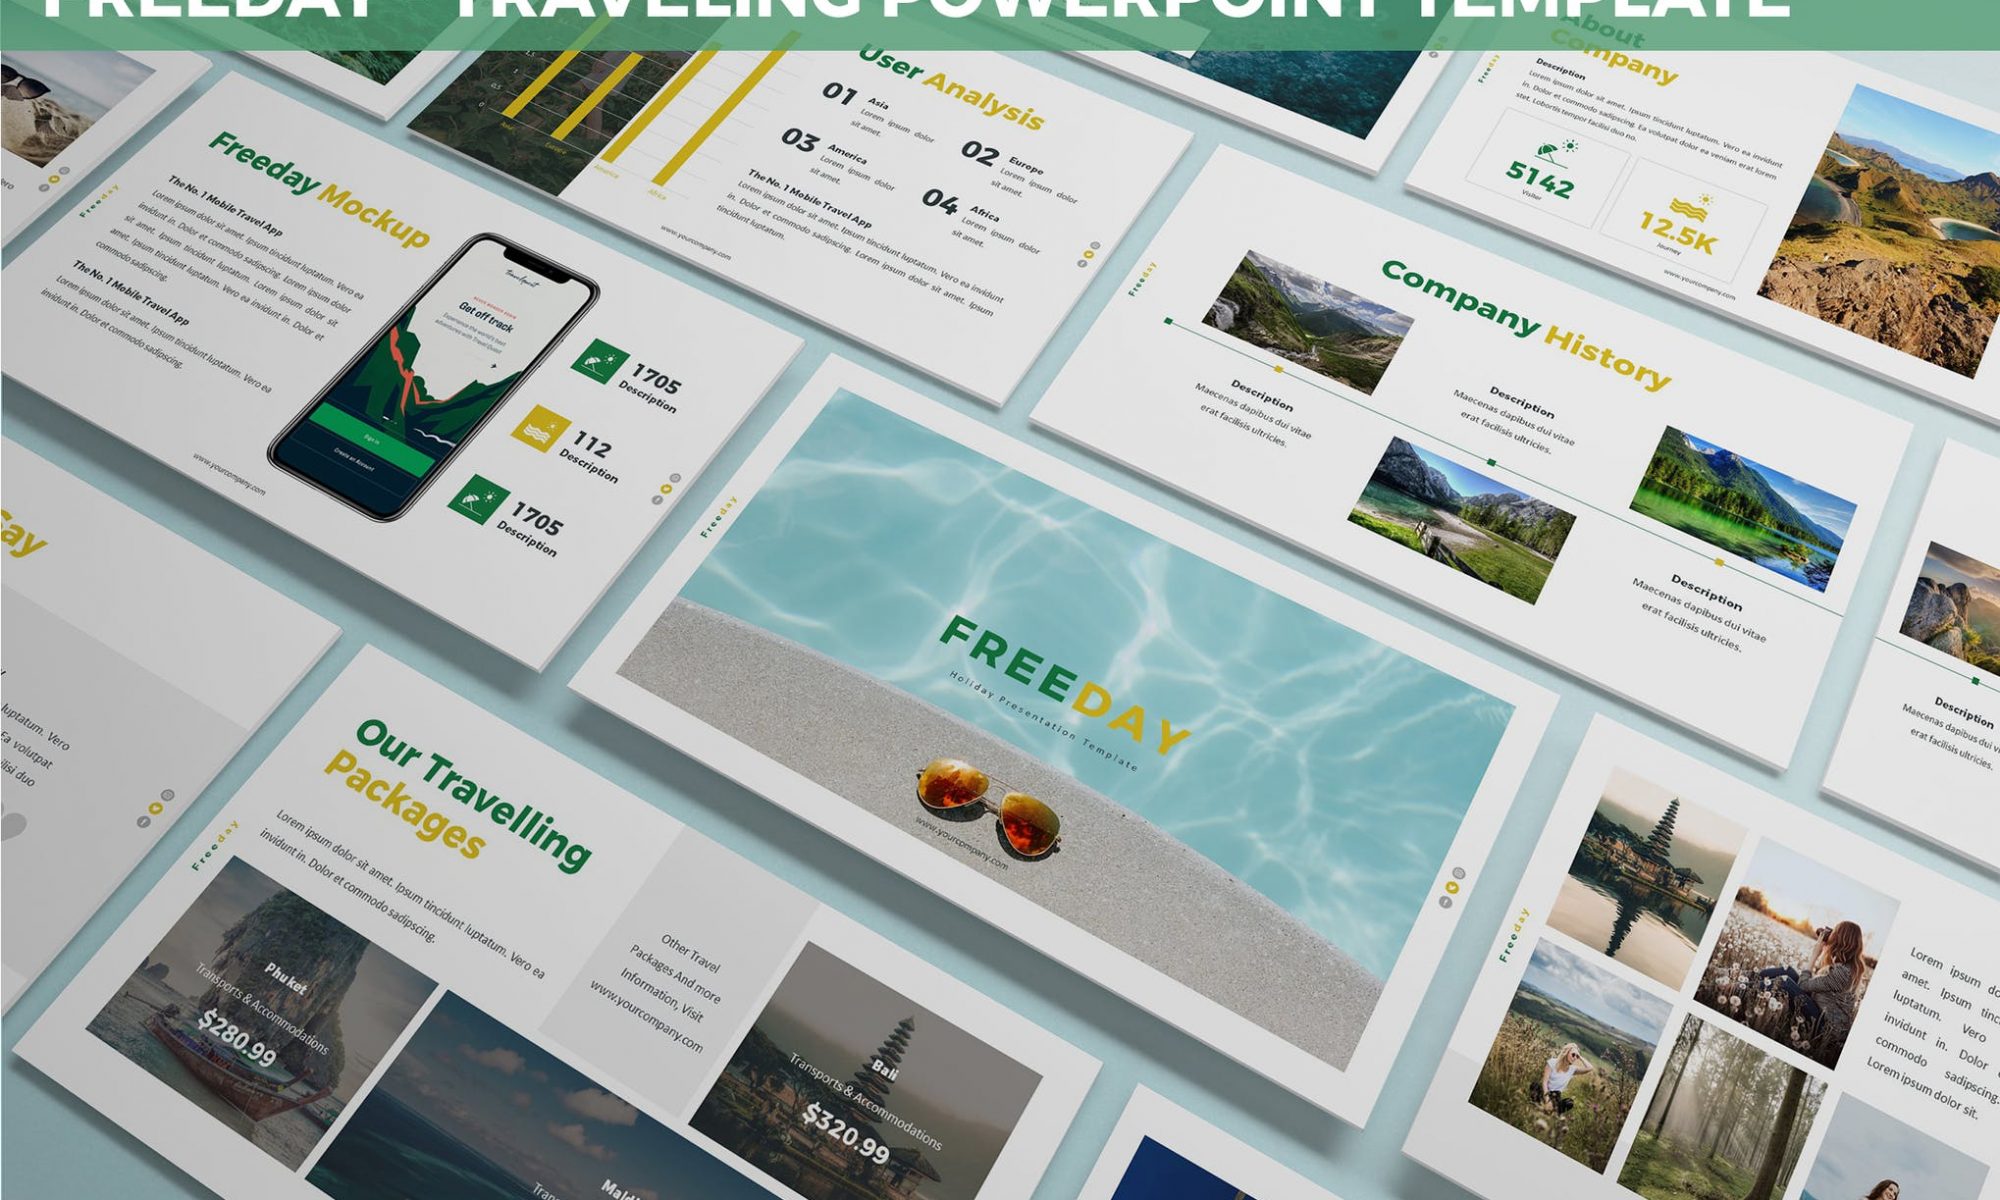 Traveling PowerPoint Template